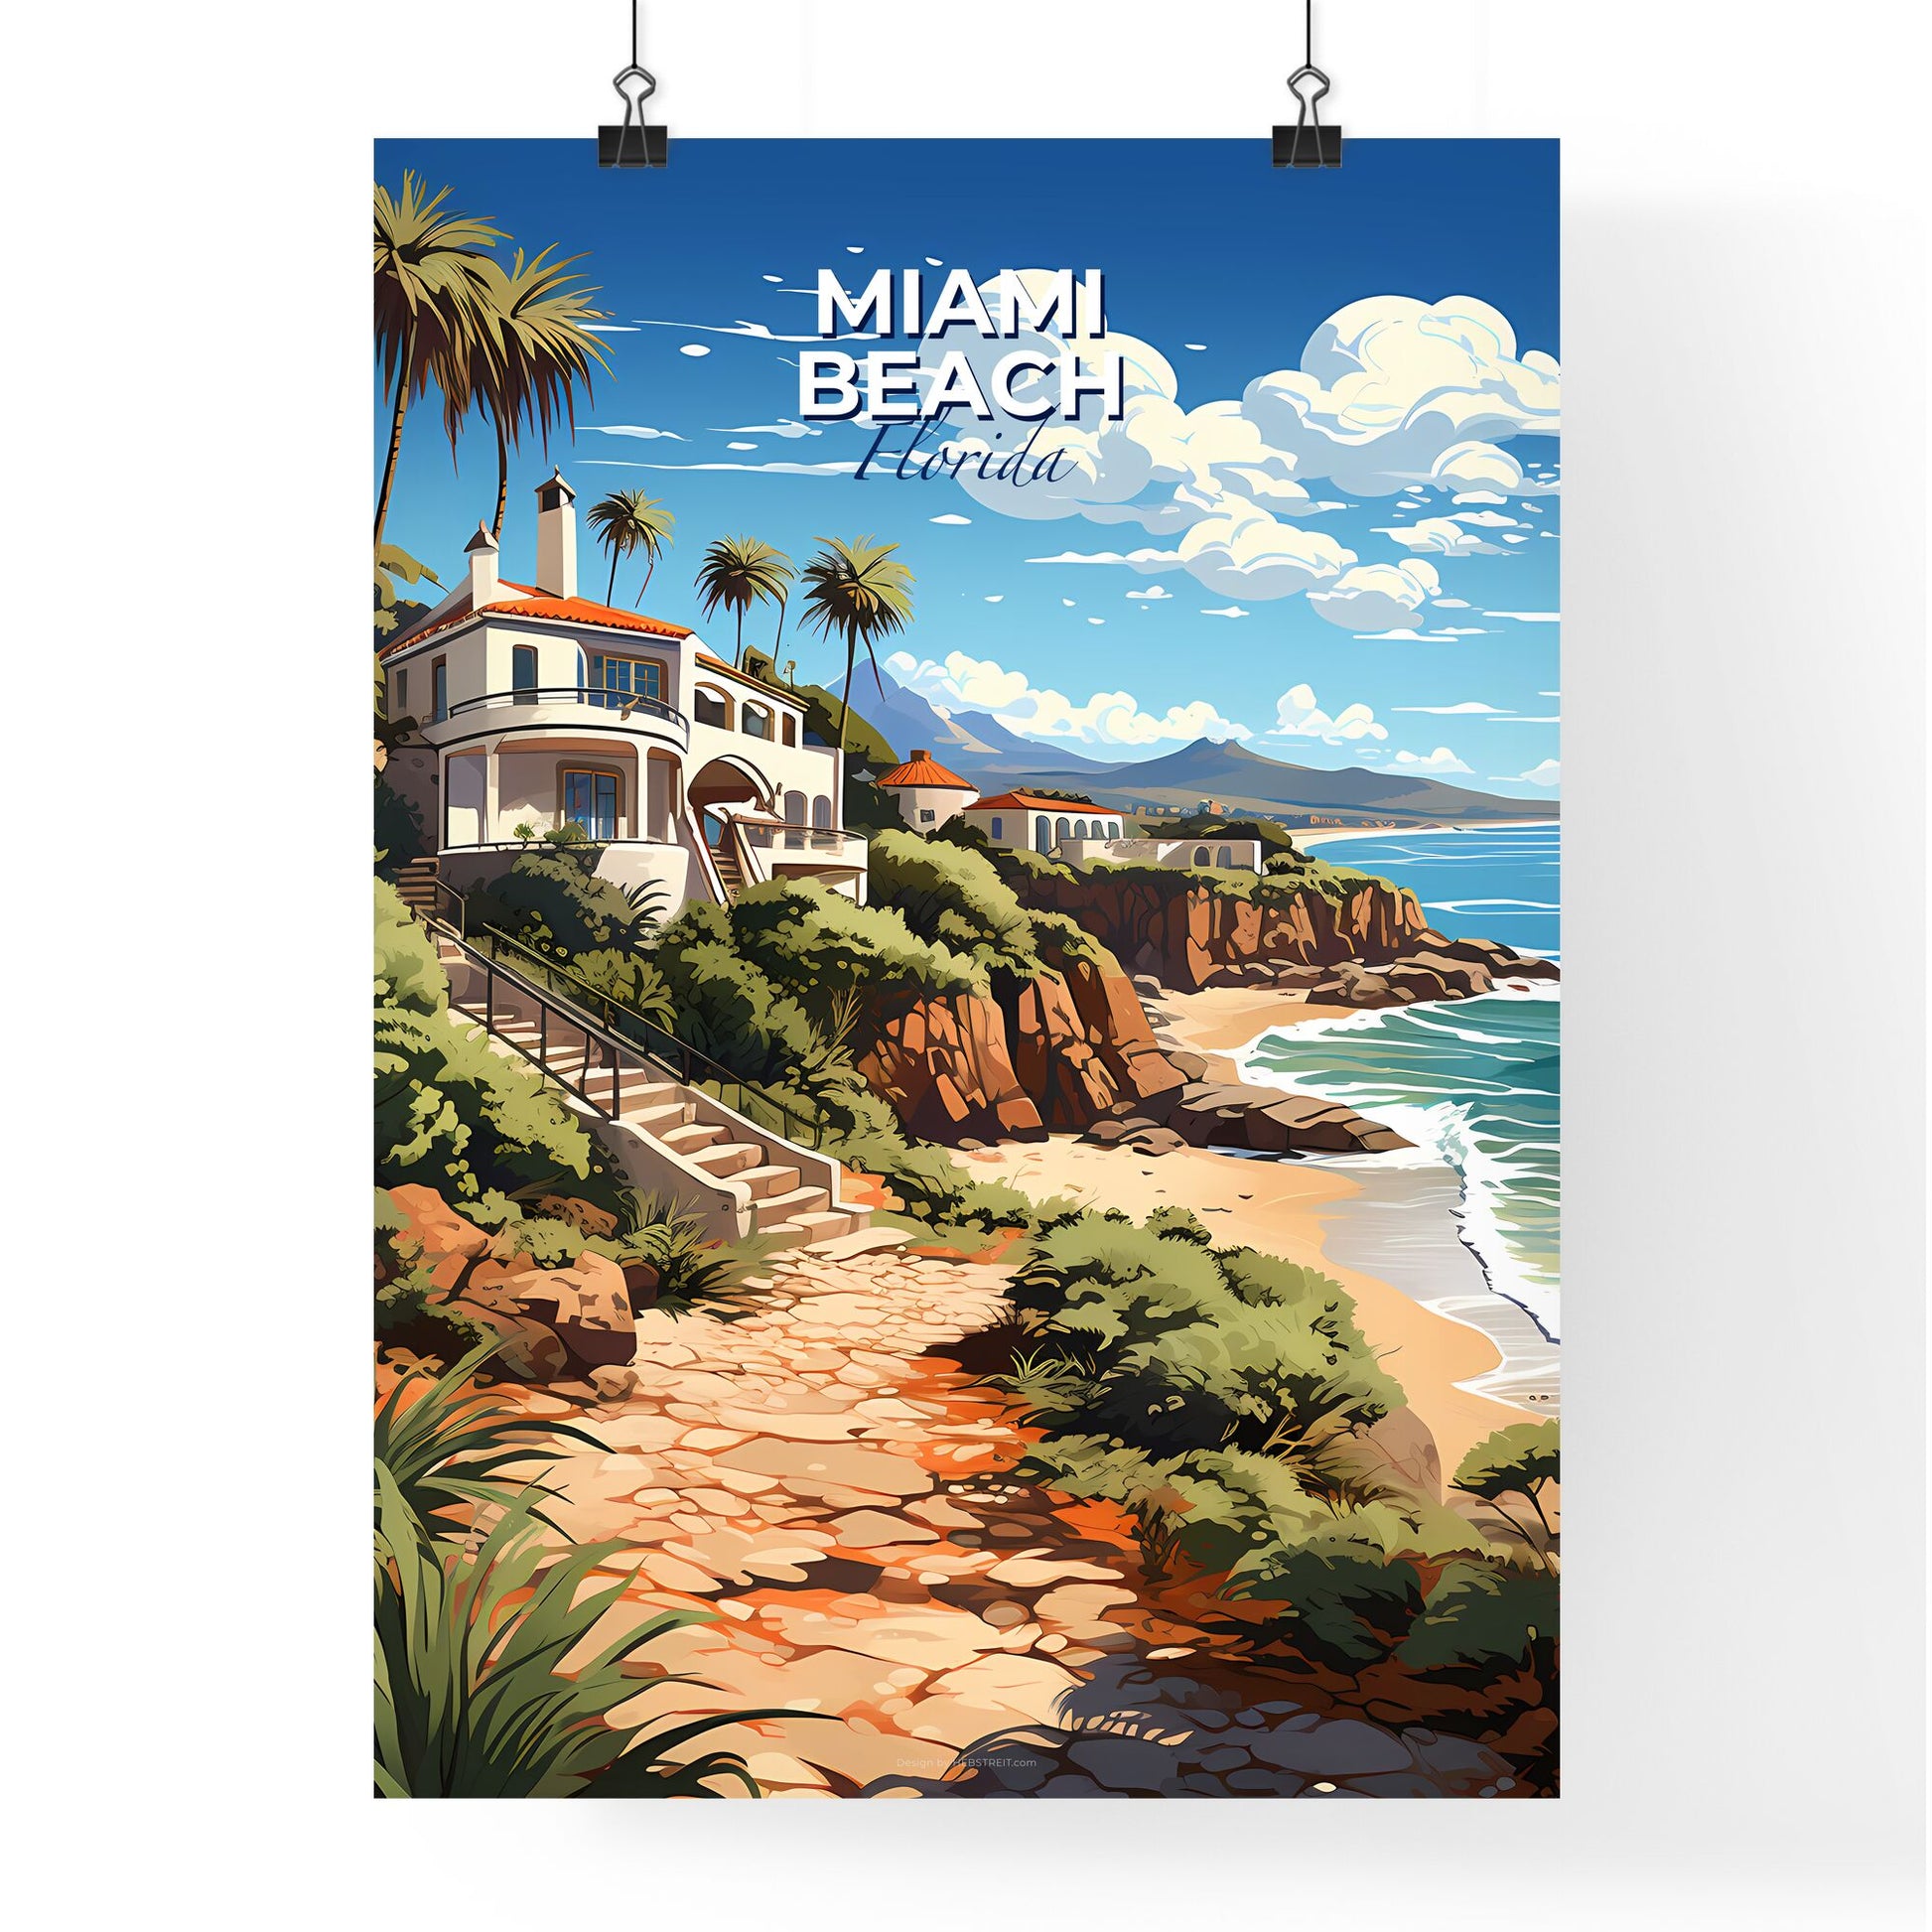 Miami Beach, Florida, A Poster of a house on a cliff by the ocean Default Title